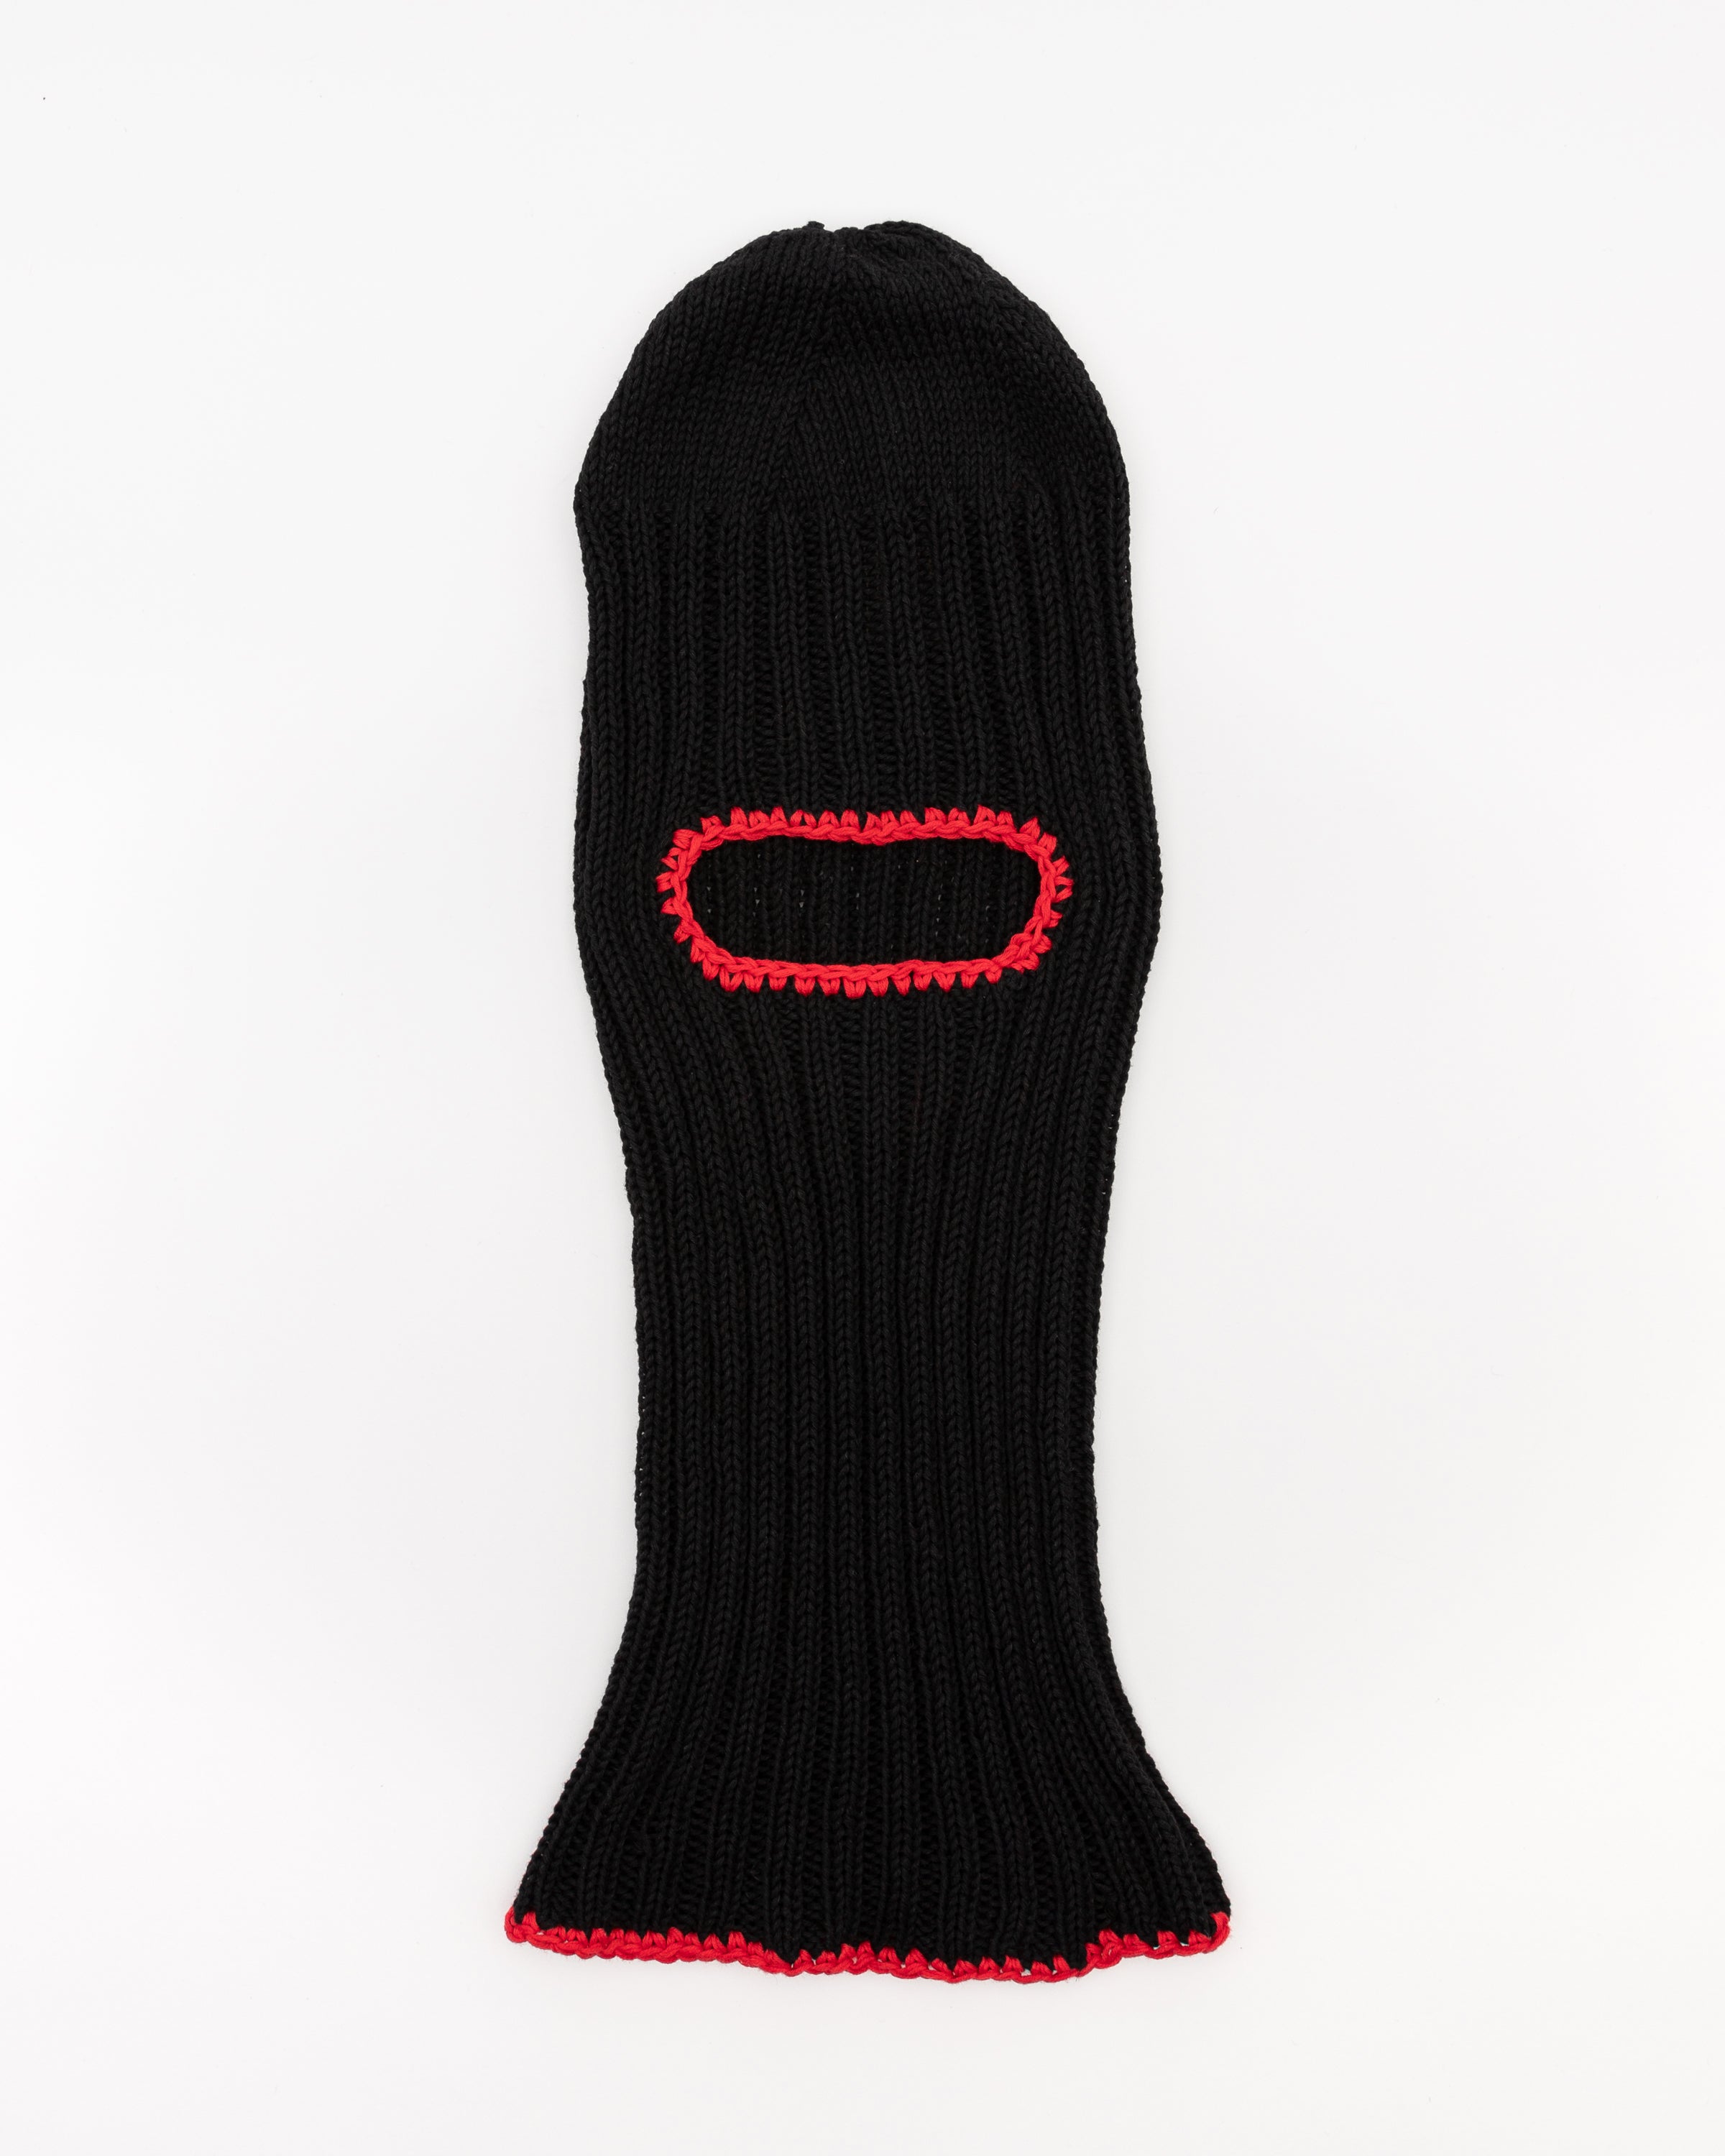 Hand Knitted Balaclava in Black and Red